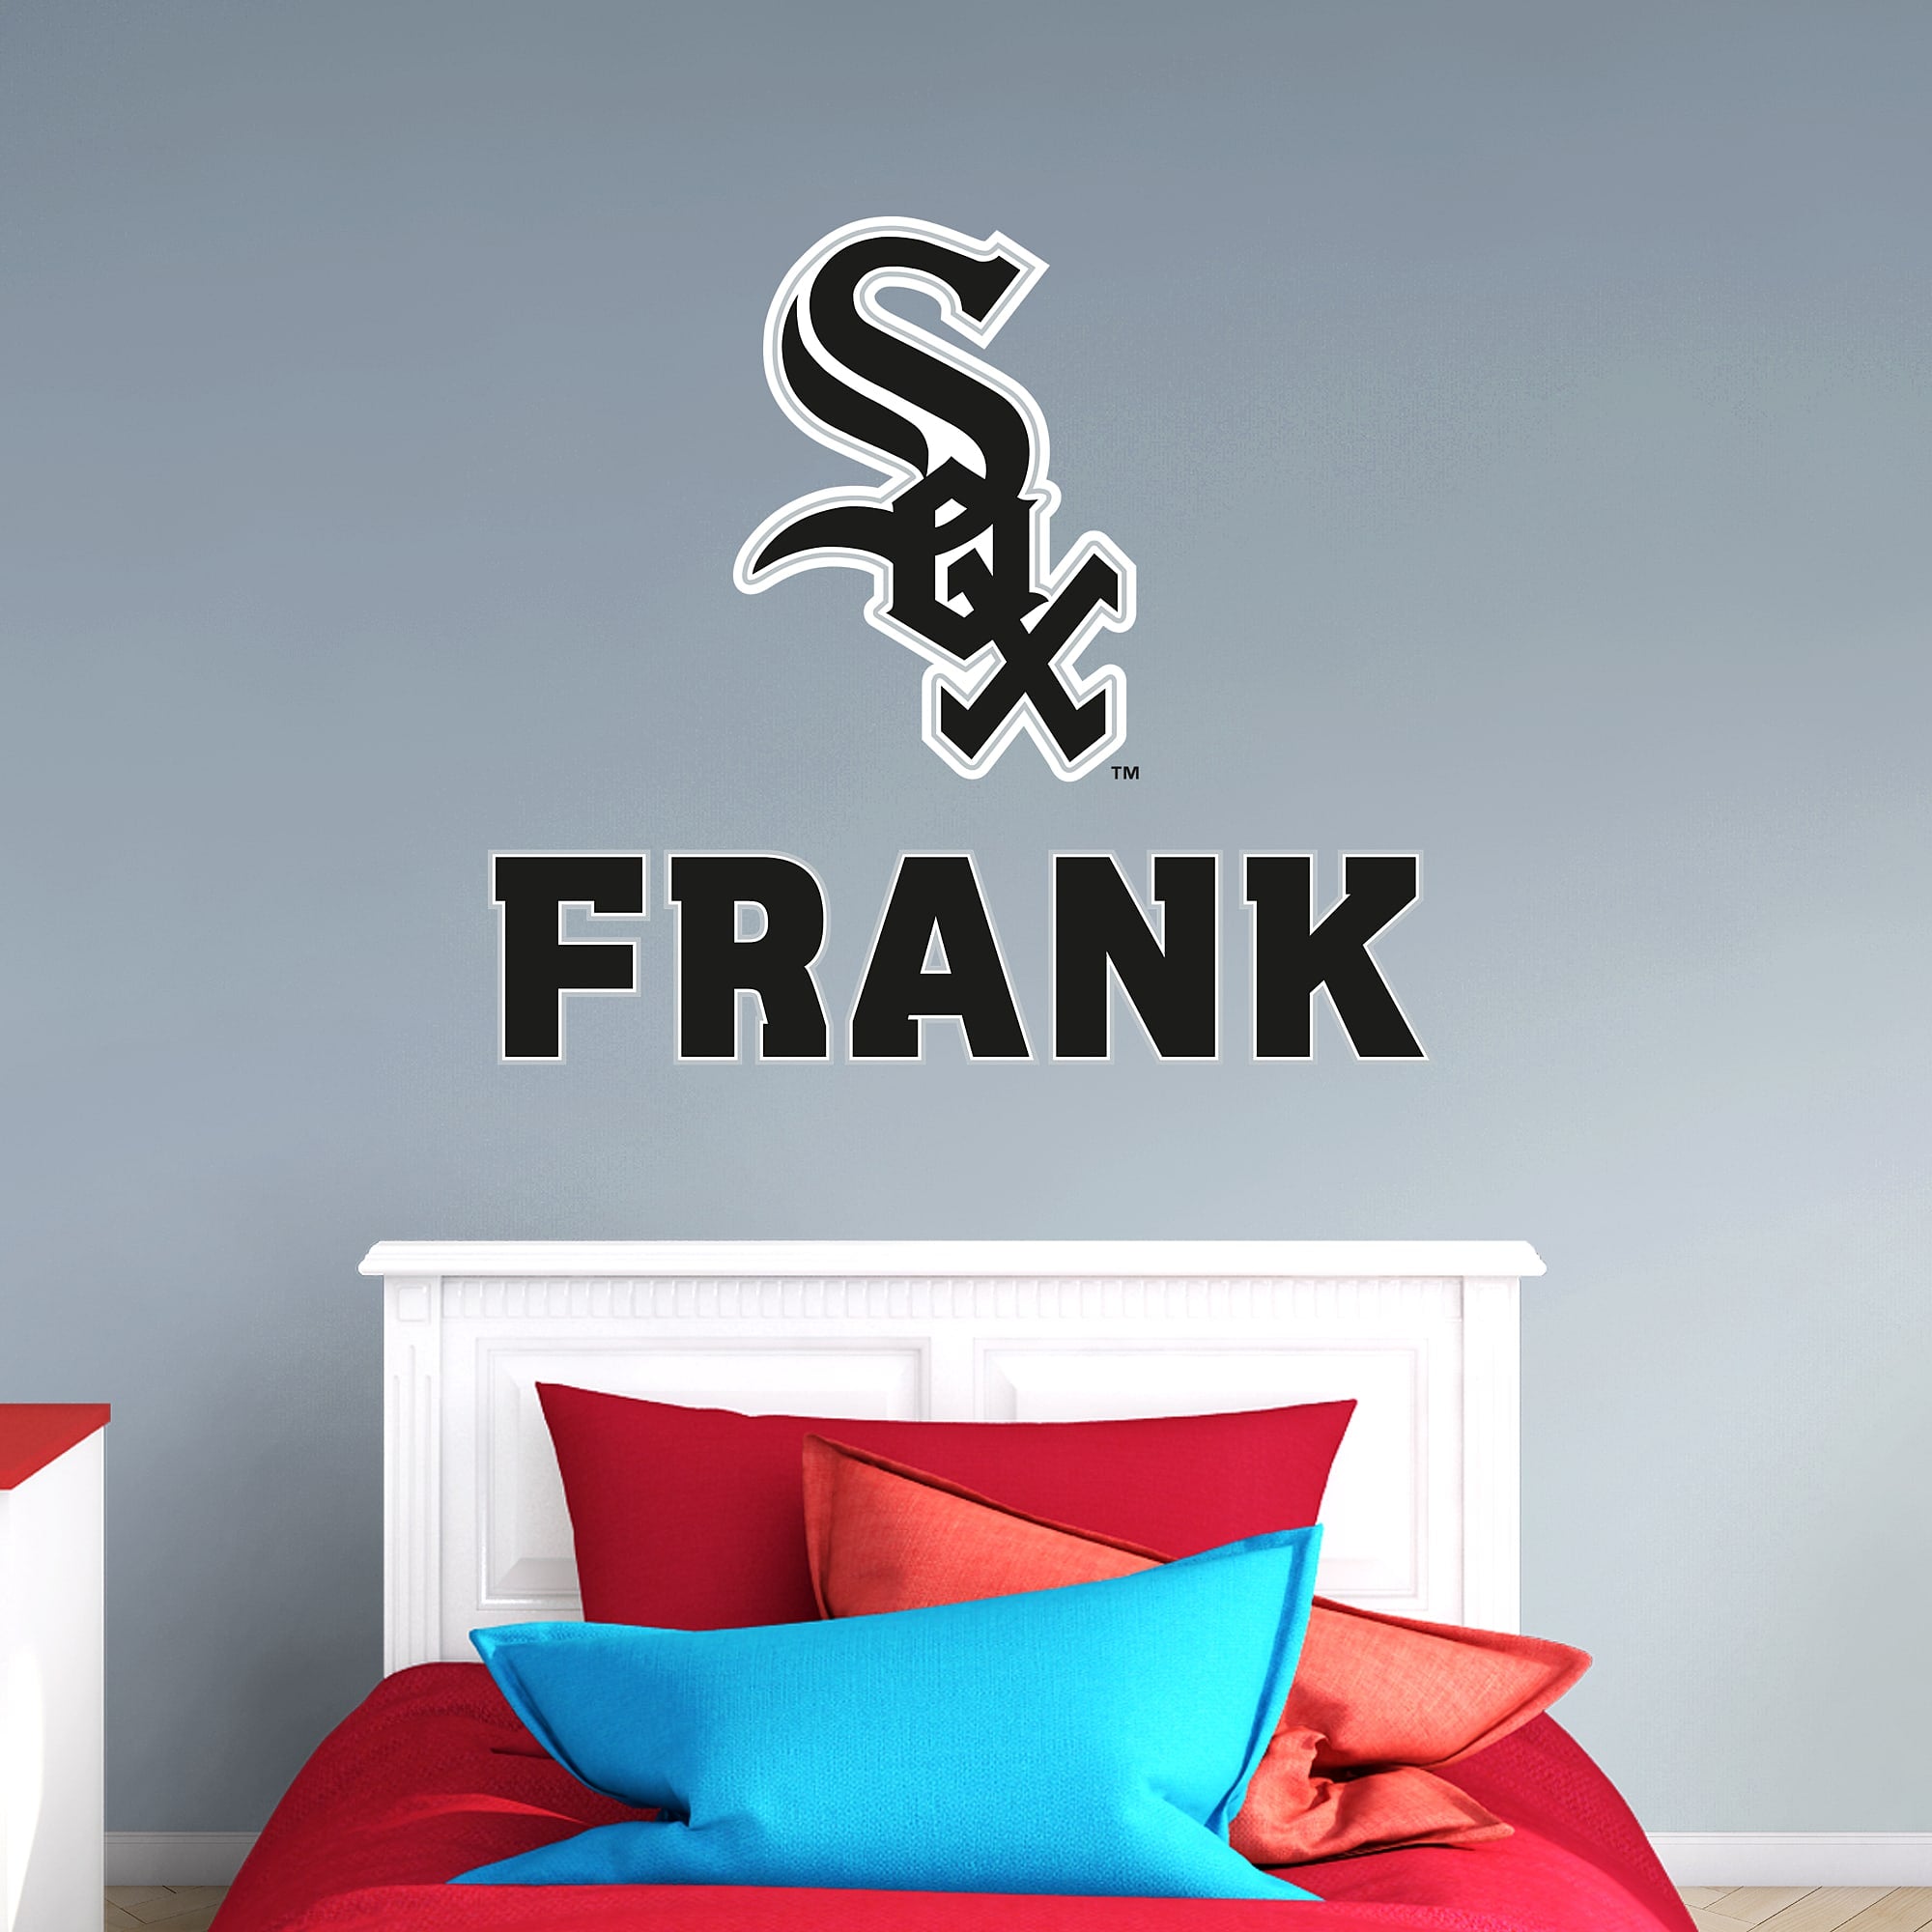 Chicago White Sox: Stacked Personalized Name - Officially Licensed MLB Transfer Decal in Black (52"W x 39.5"H) by Fathead | Viny